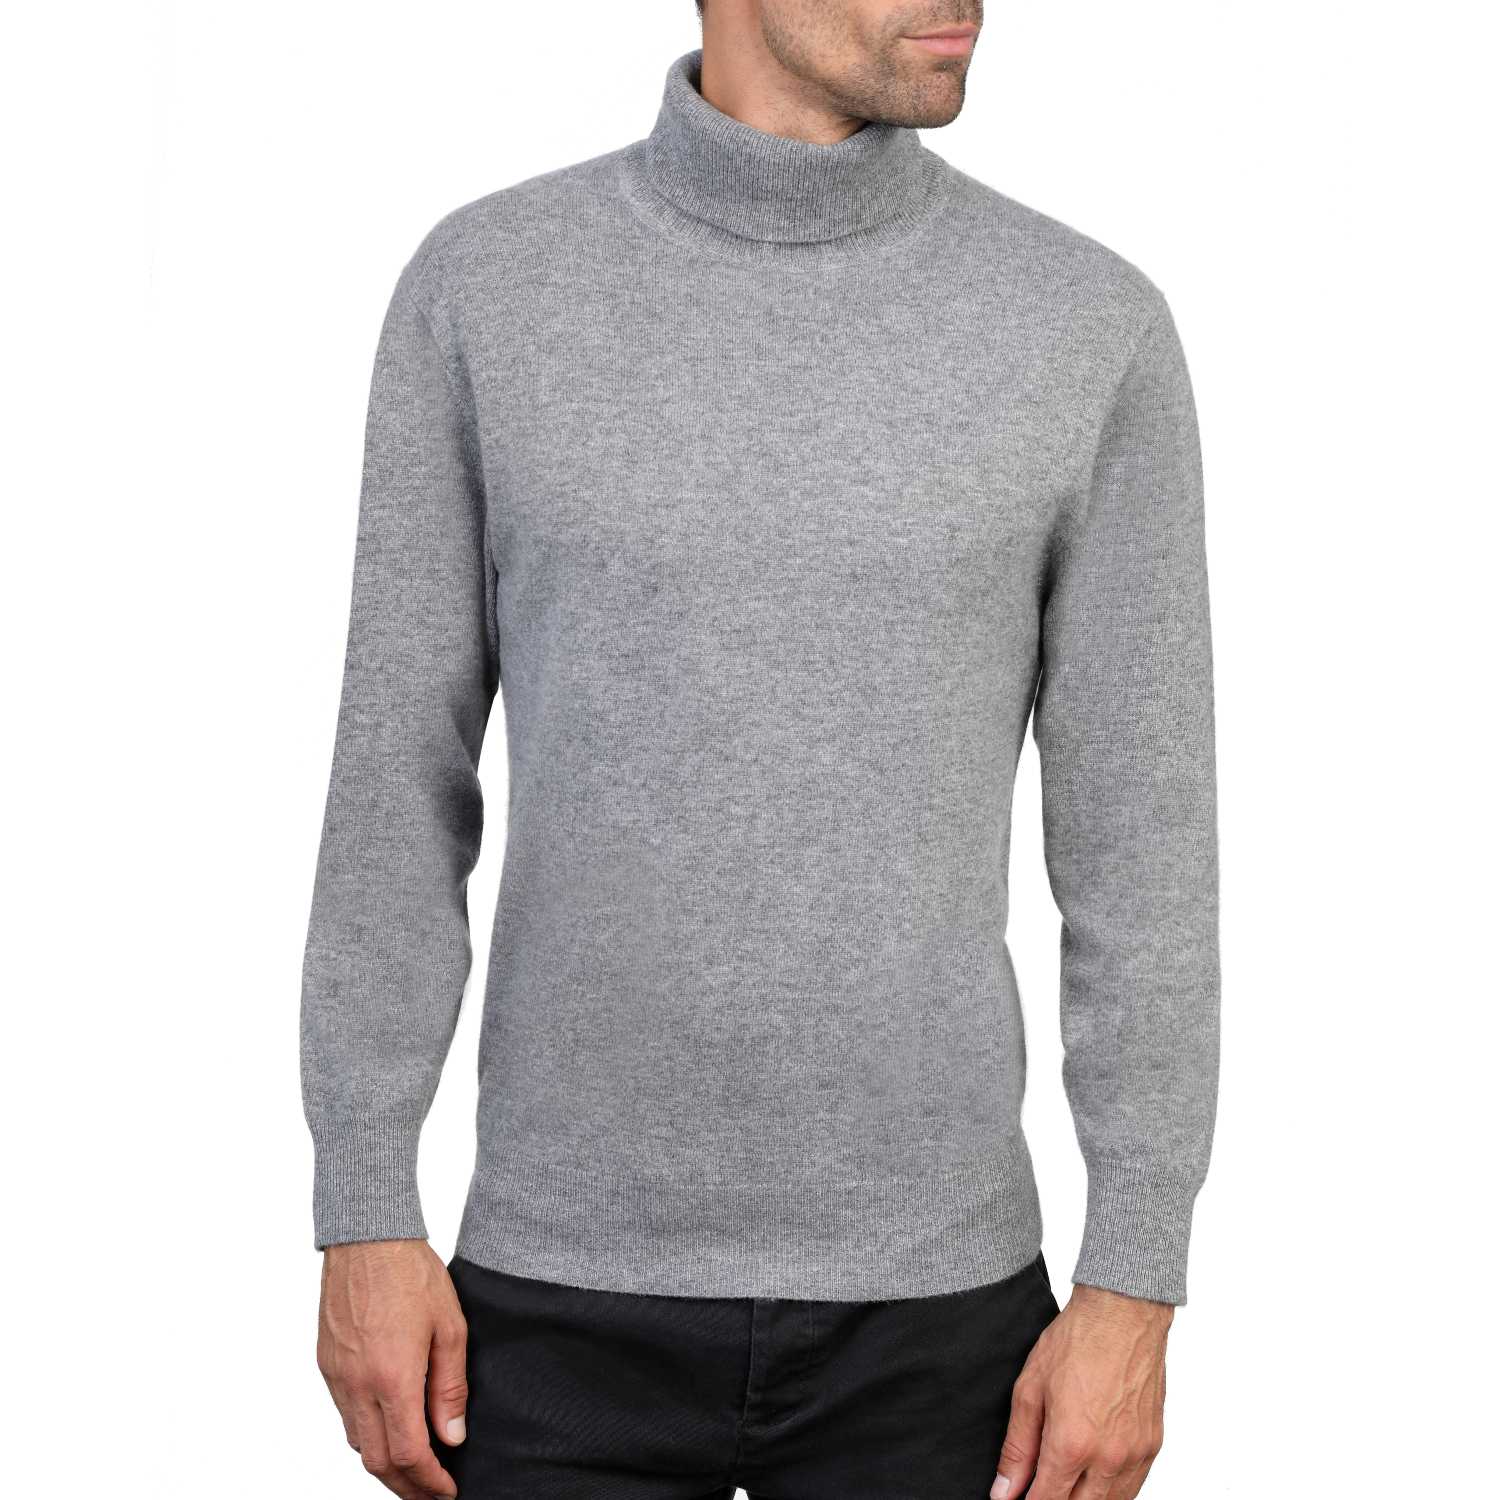 Mens Polo Neck Sweater In Pure Cashmere - The Cashmere Choice